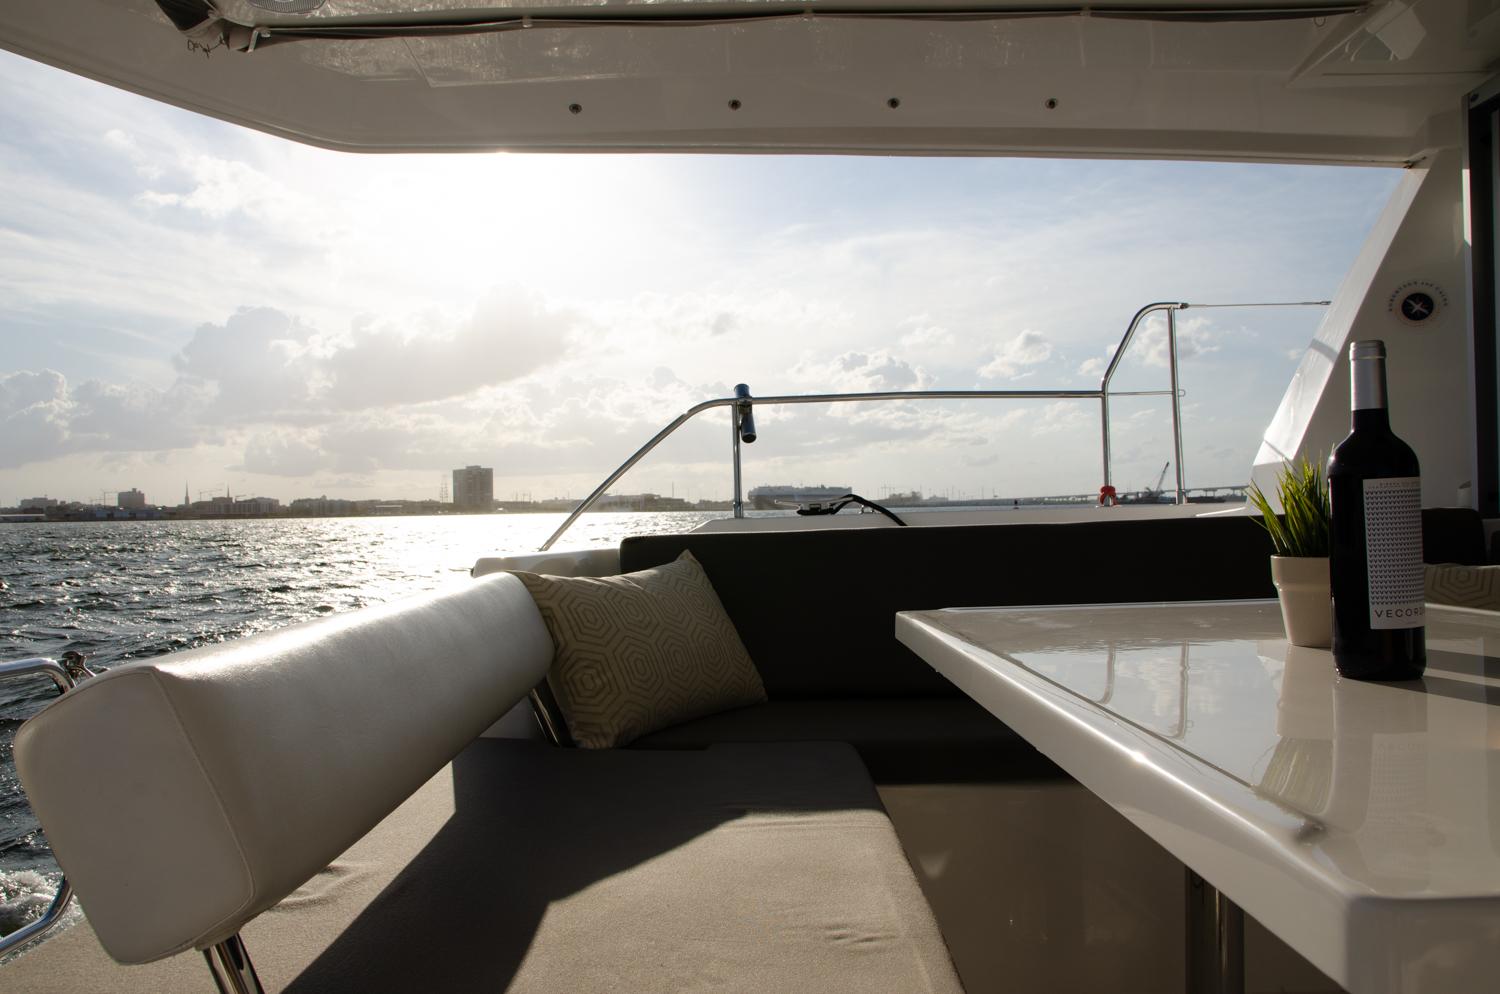 Sunset charters are available for private parties in Charleston SC.